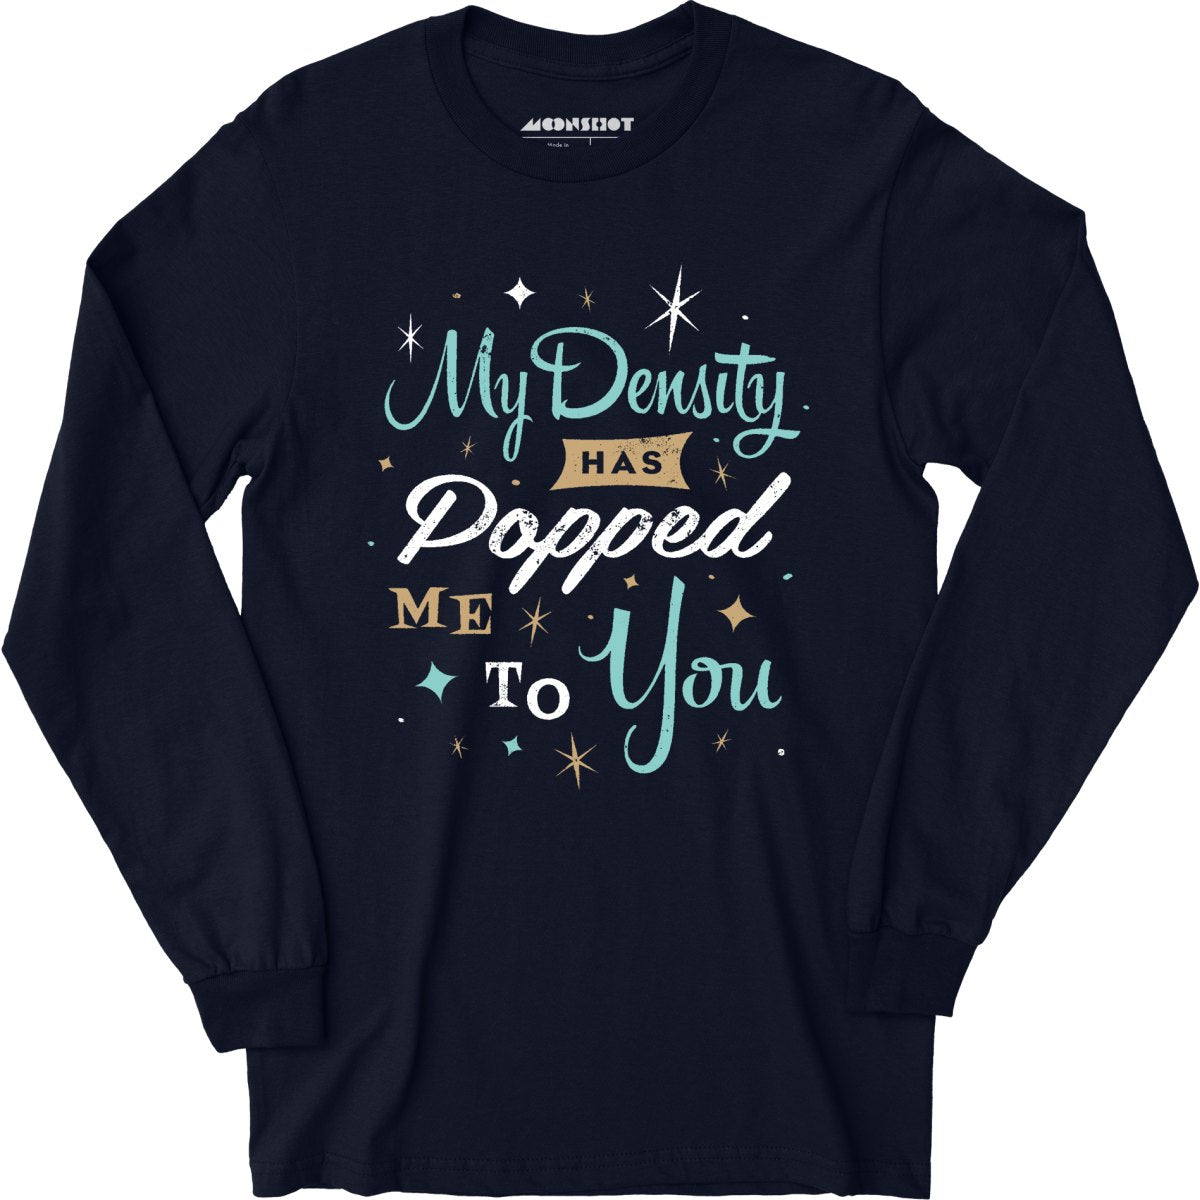 My Density Has Popped Me To You - Long Sleeve T-Shirt